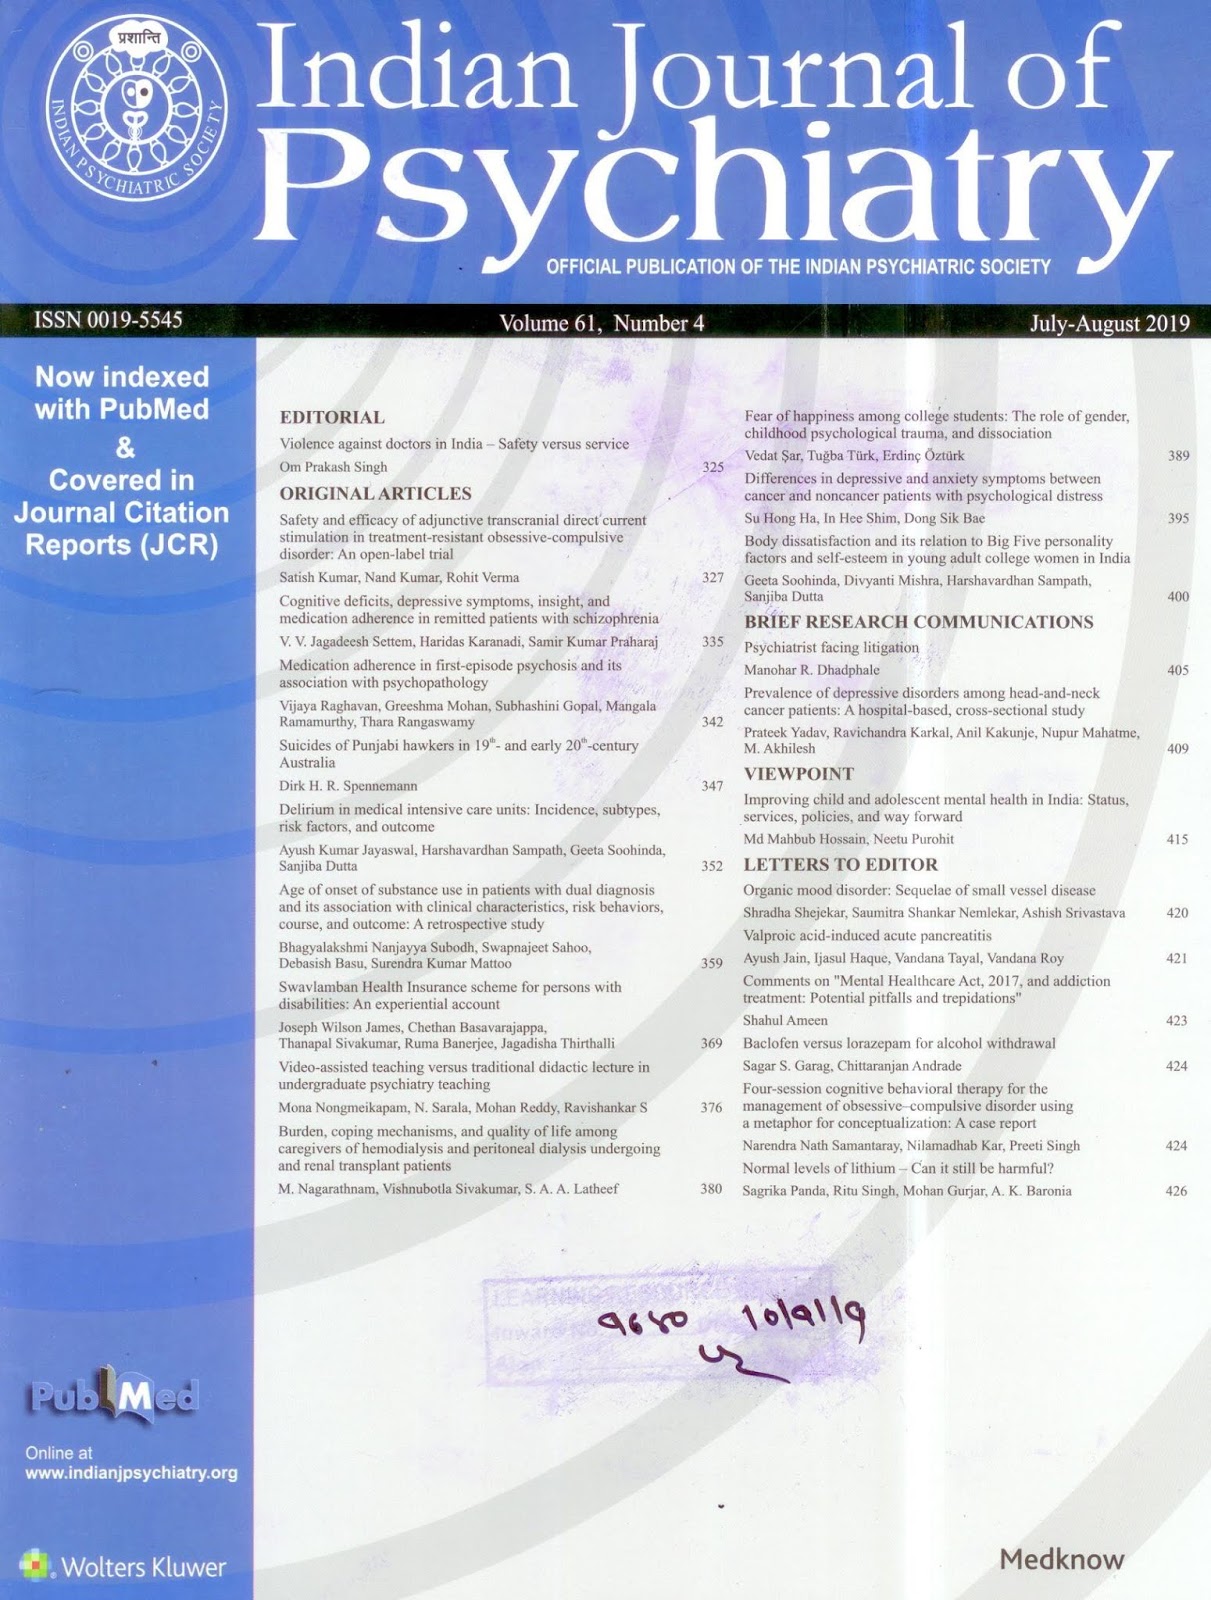 http://www.indianjpsychiatry.org/showBackIssue.asp?issn=0019-5545;year=2019;volume=61;issue=4;month=July-August